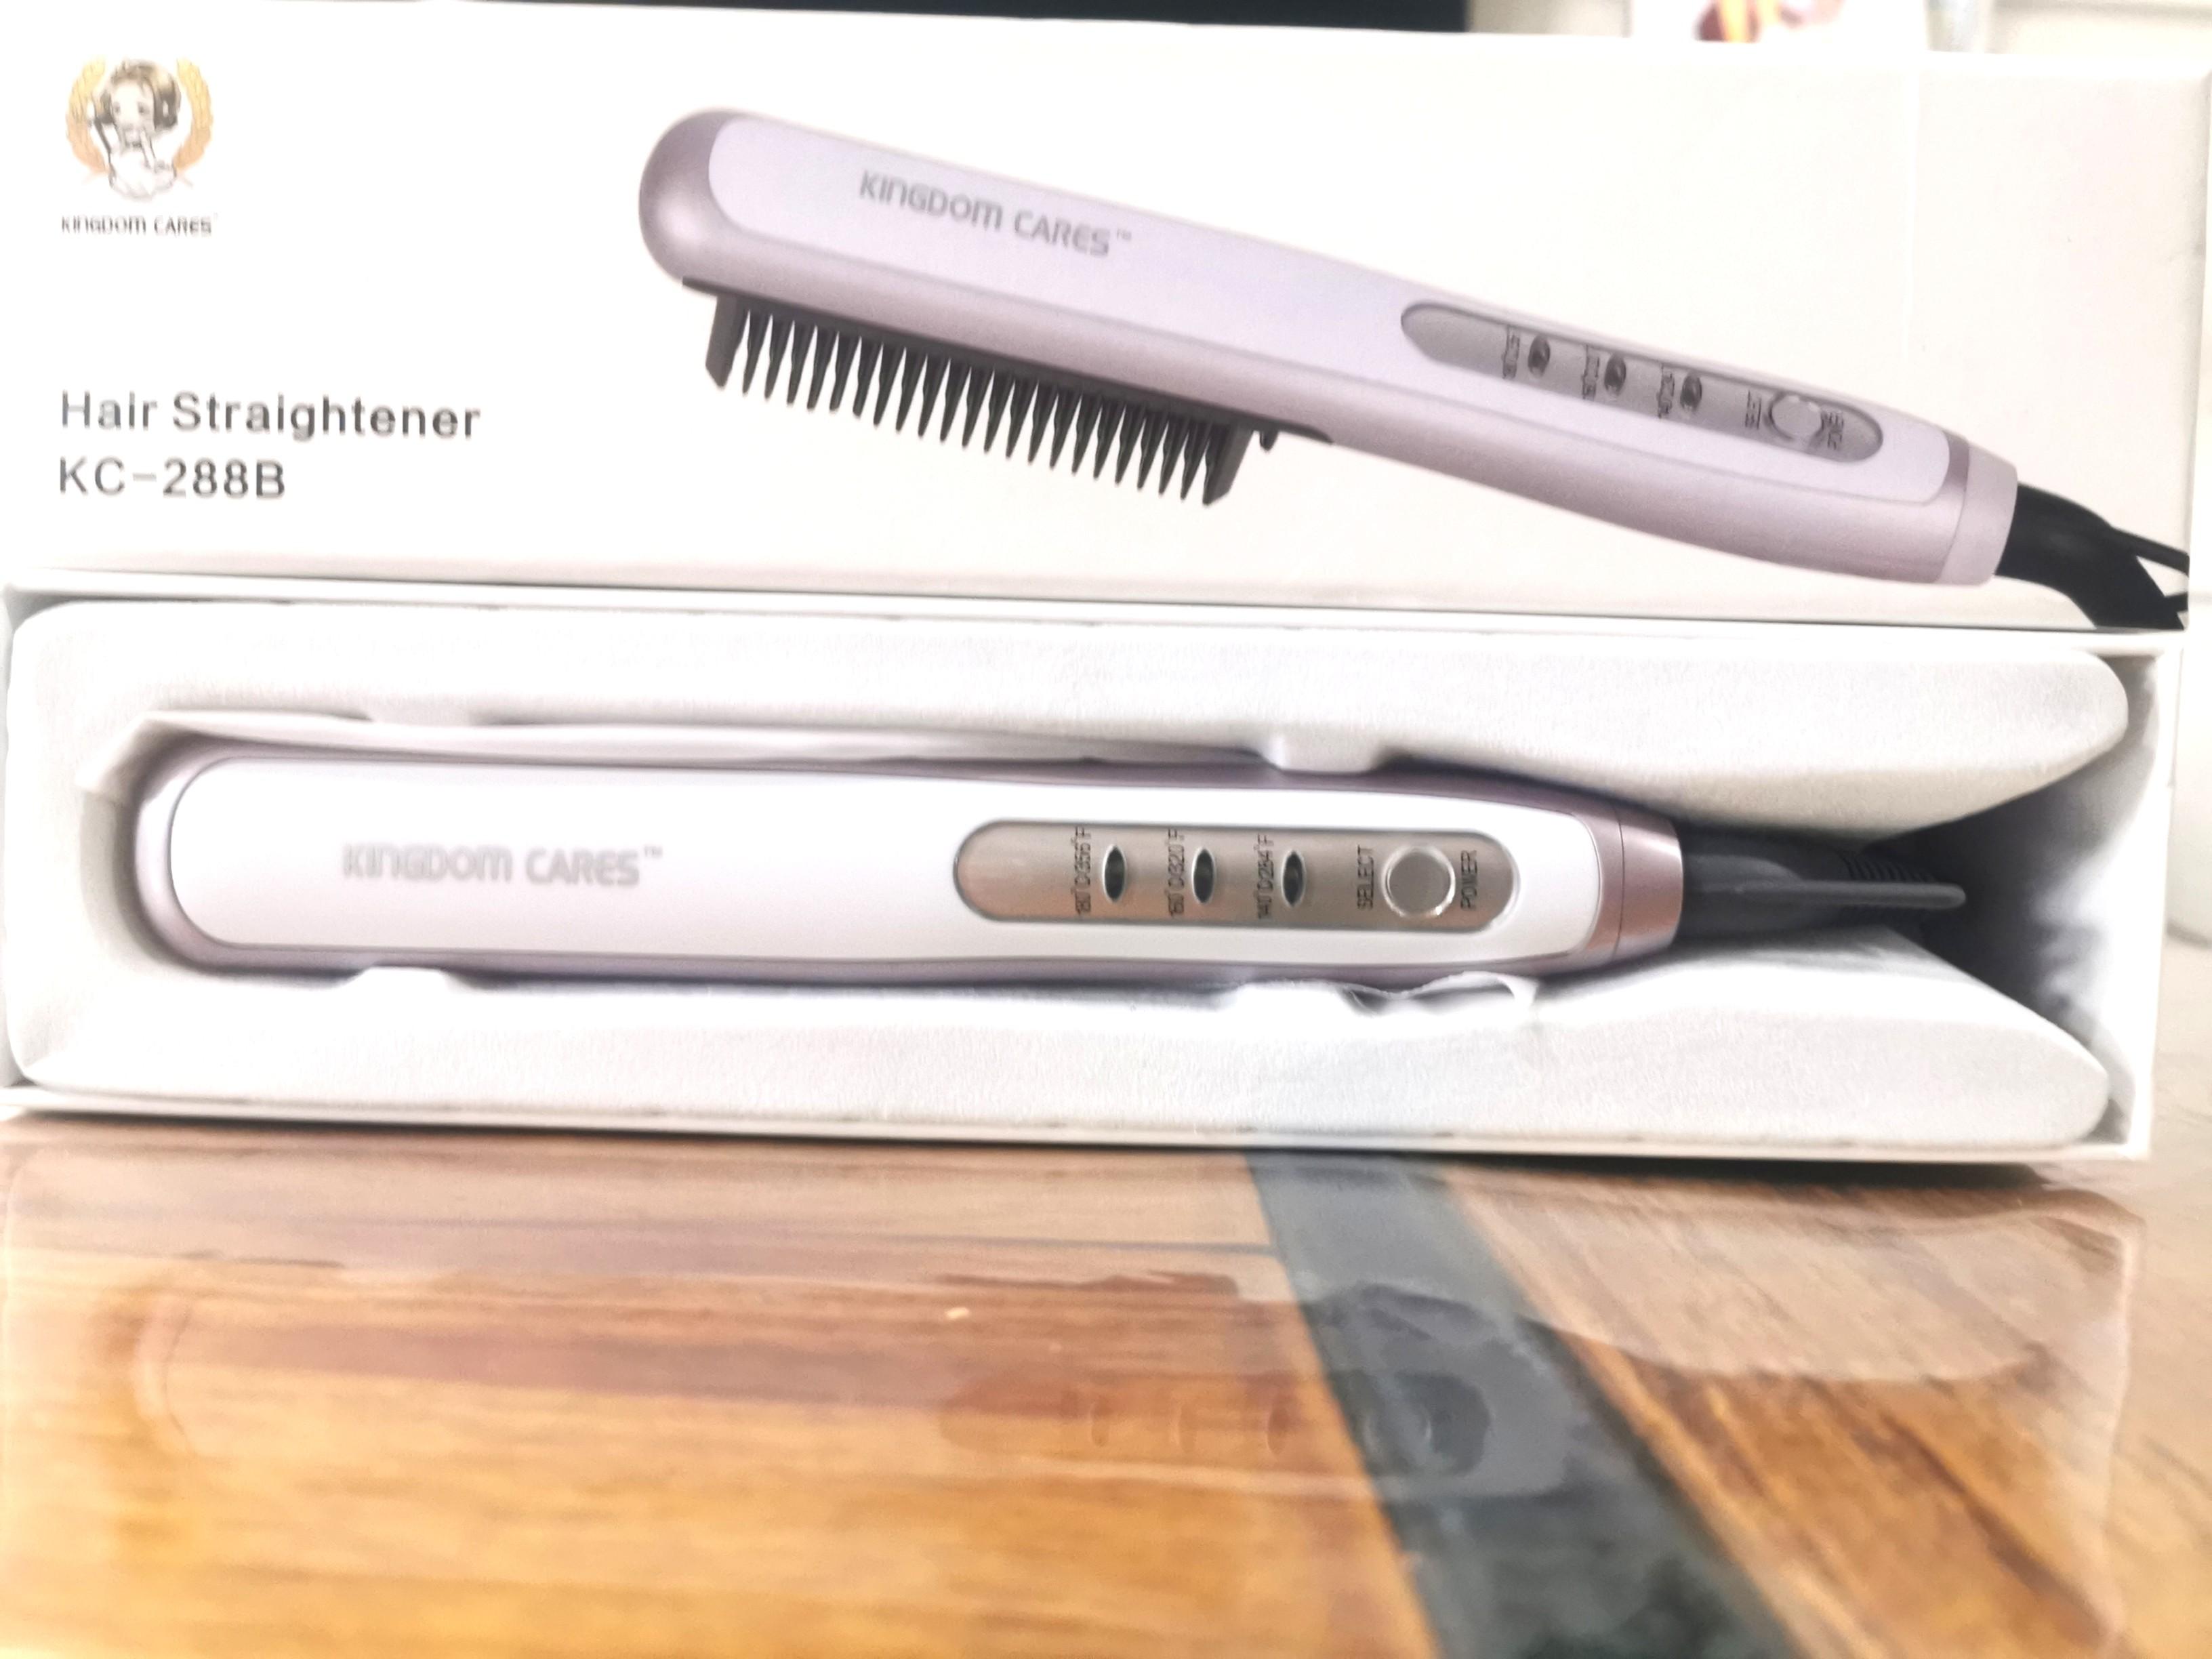 only set* BNIB Kingdom Cares Hair straightener KC-288B, Beauty & Personal  Care, Hair on Carousell